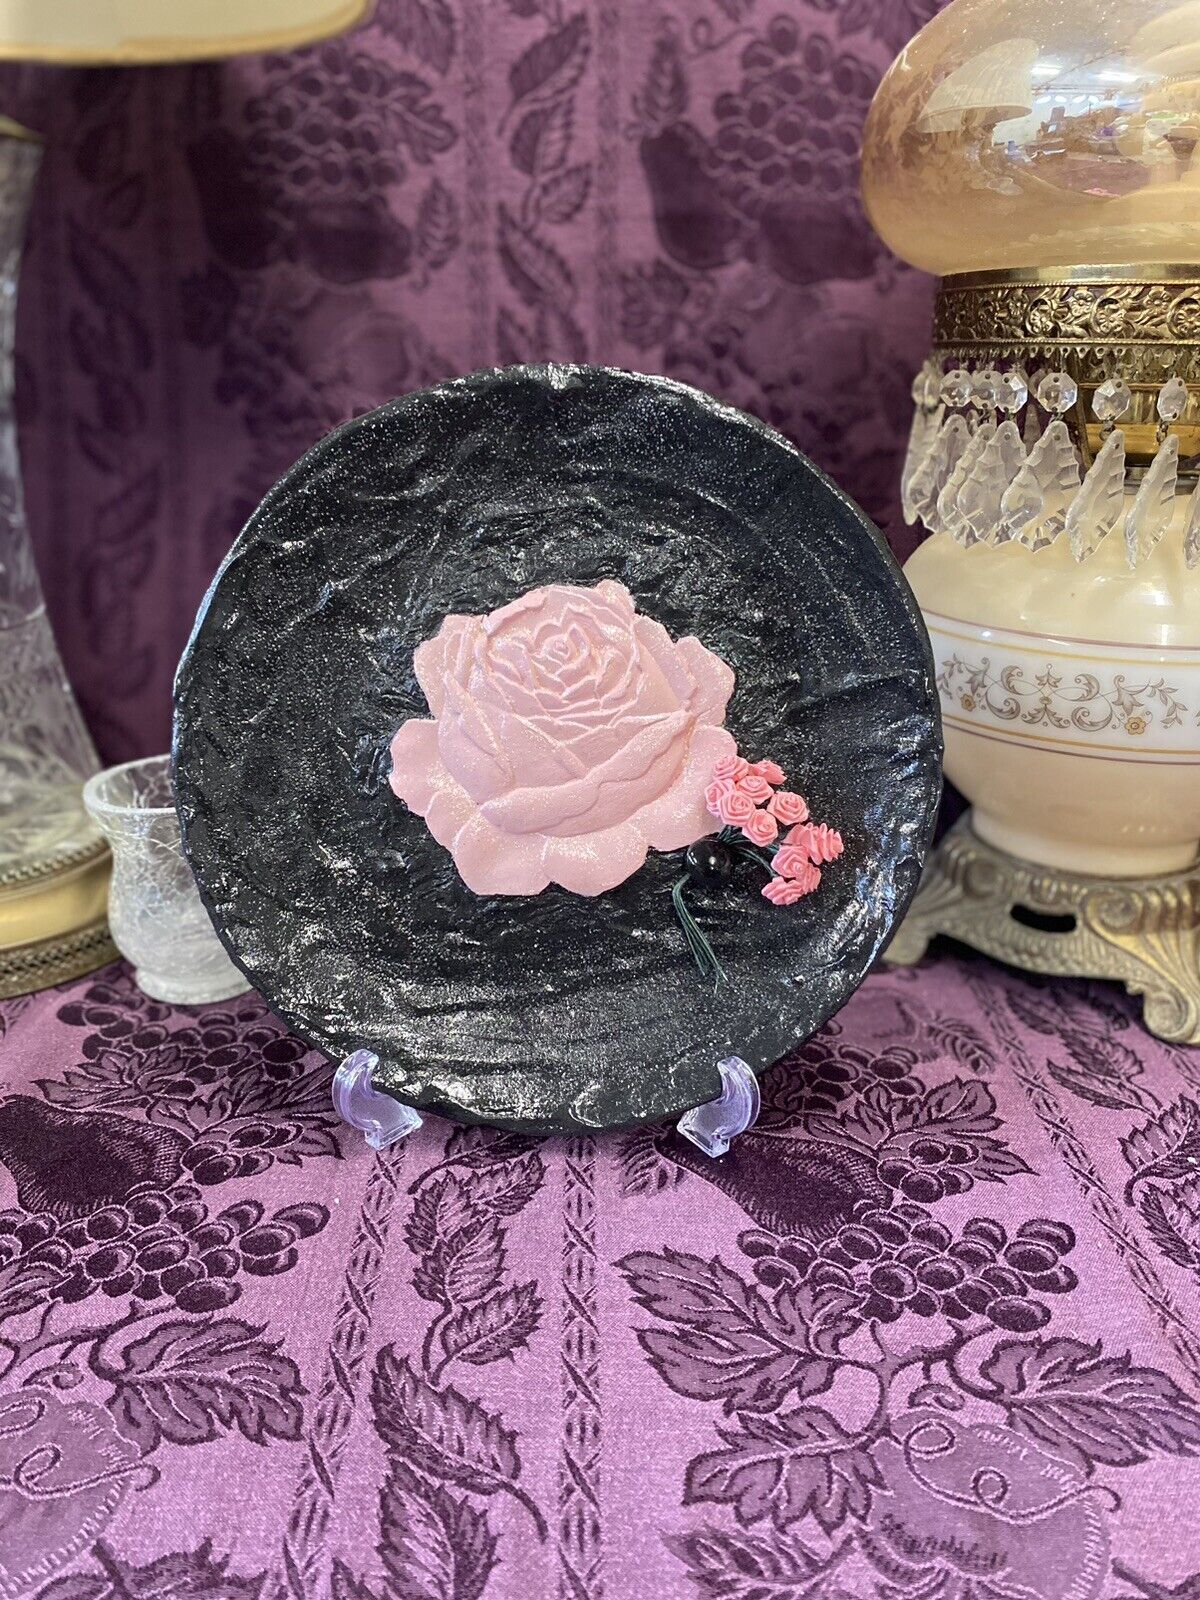 Hand Painted Textured Decorative Plate Black & Pink Rose Display Or Wall Hanging Decorative Plate Stylin' Spirit   